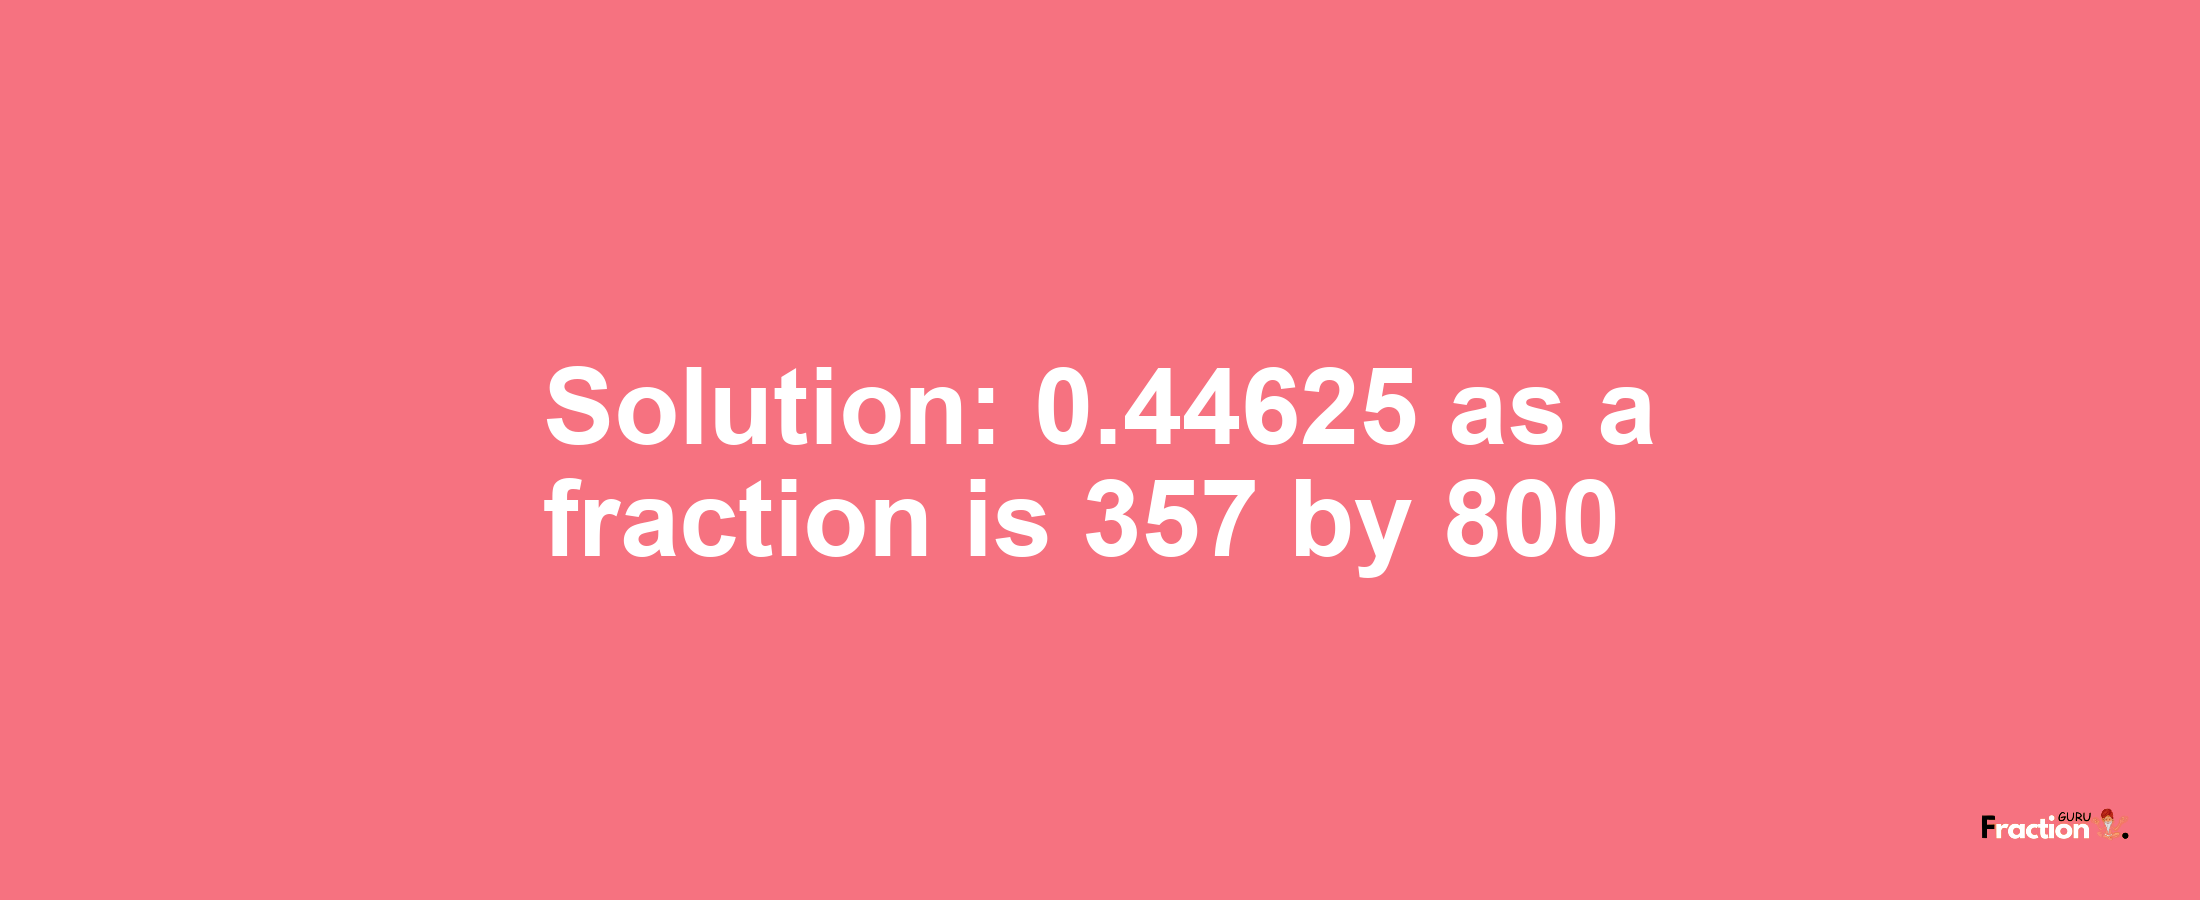 Solution:0.44625 as a fraction is 357/800